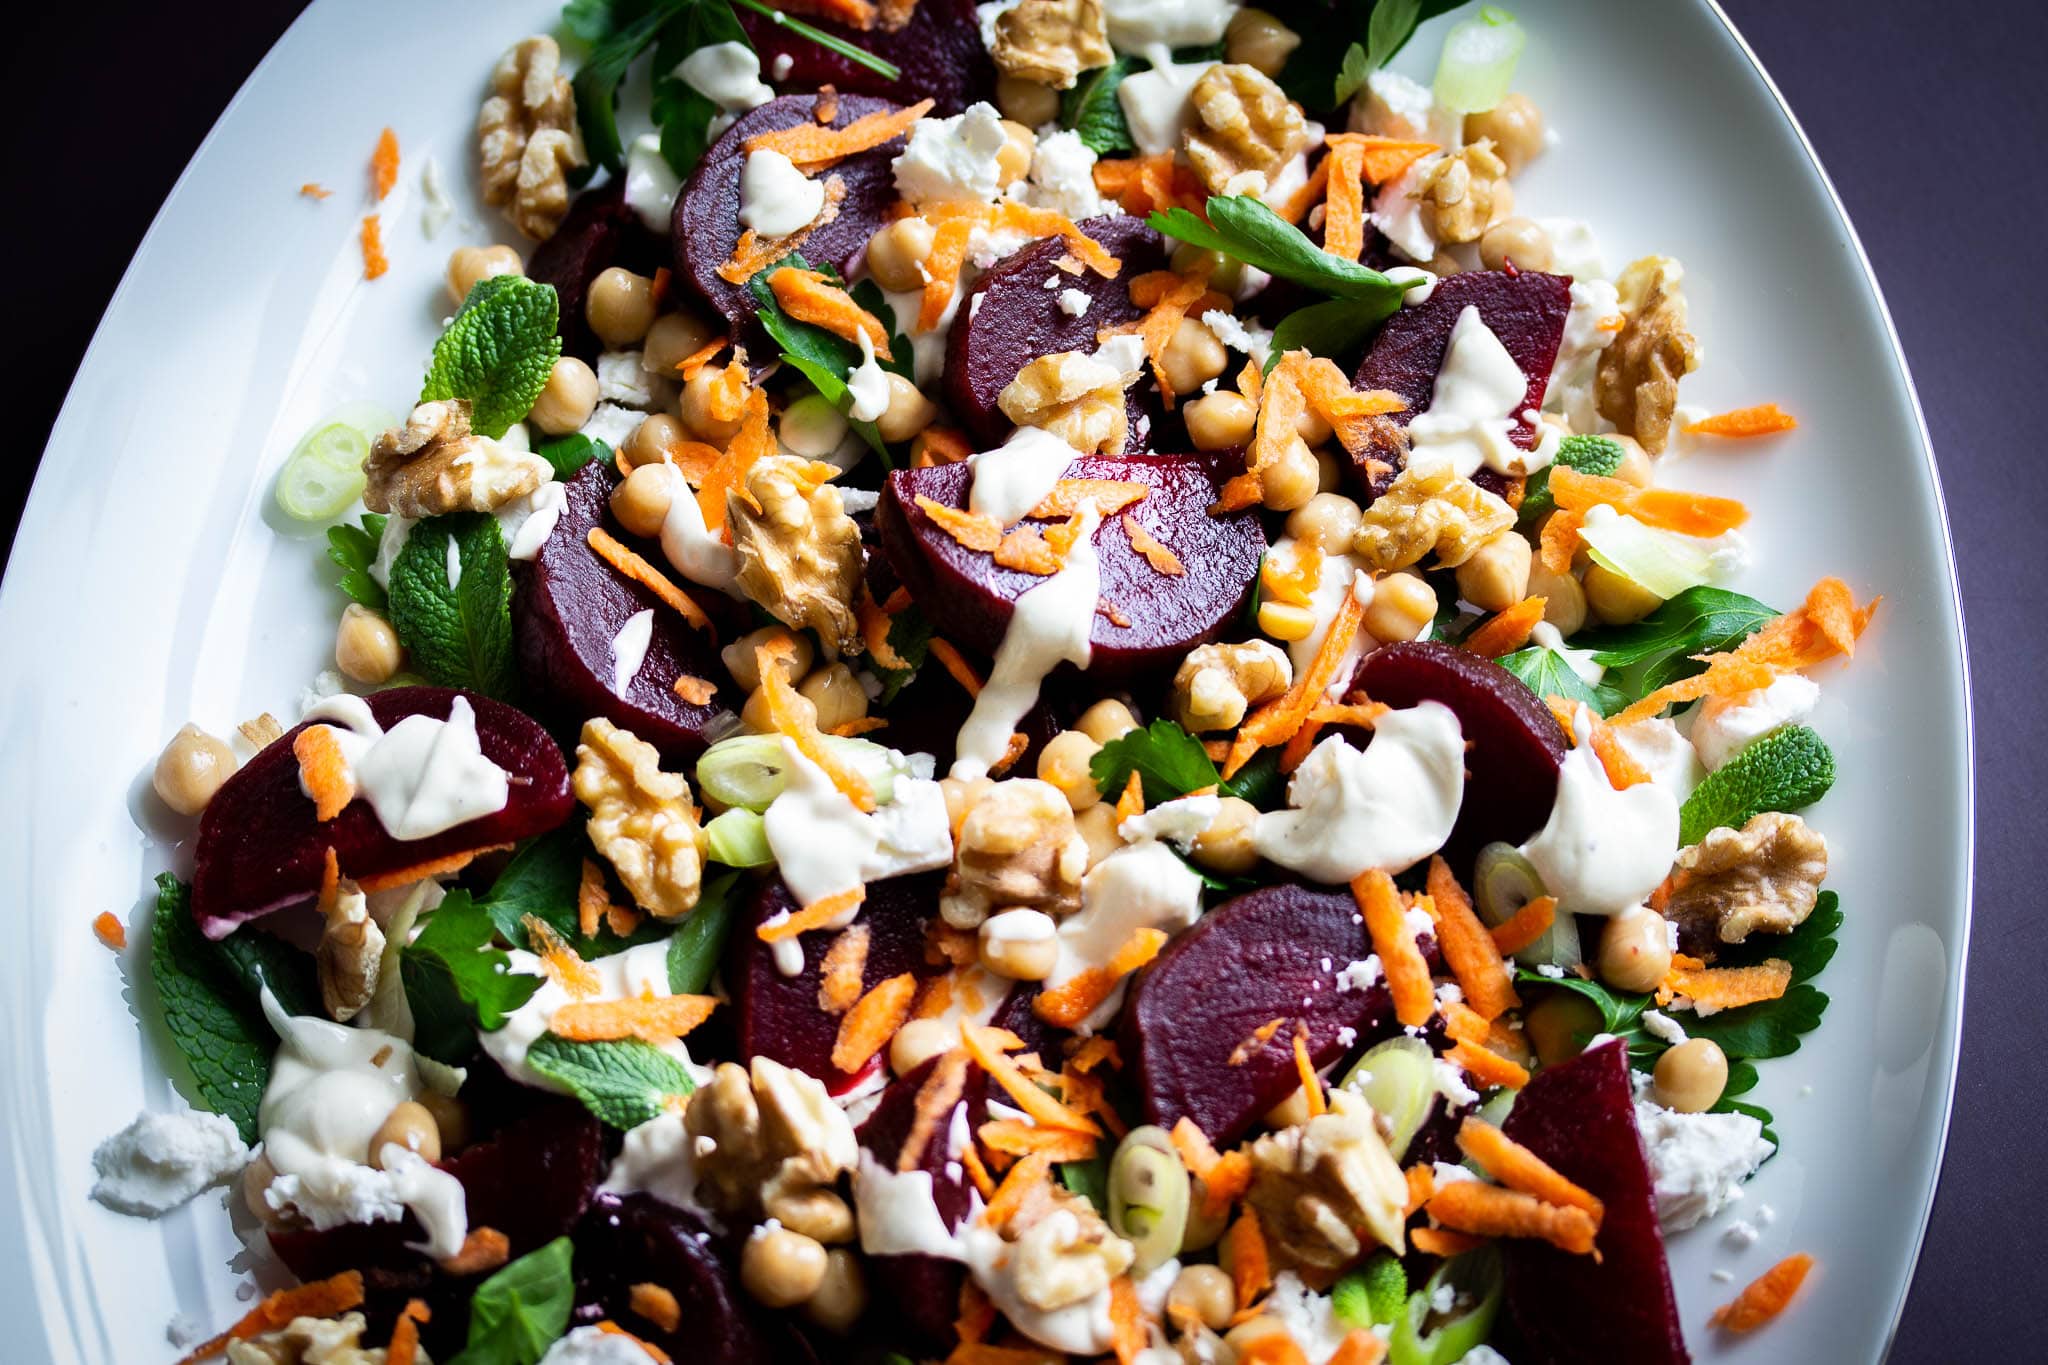 Beetroot salad with chickpeas